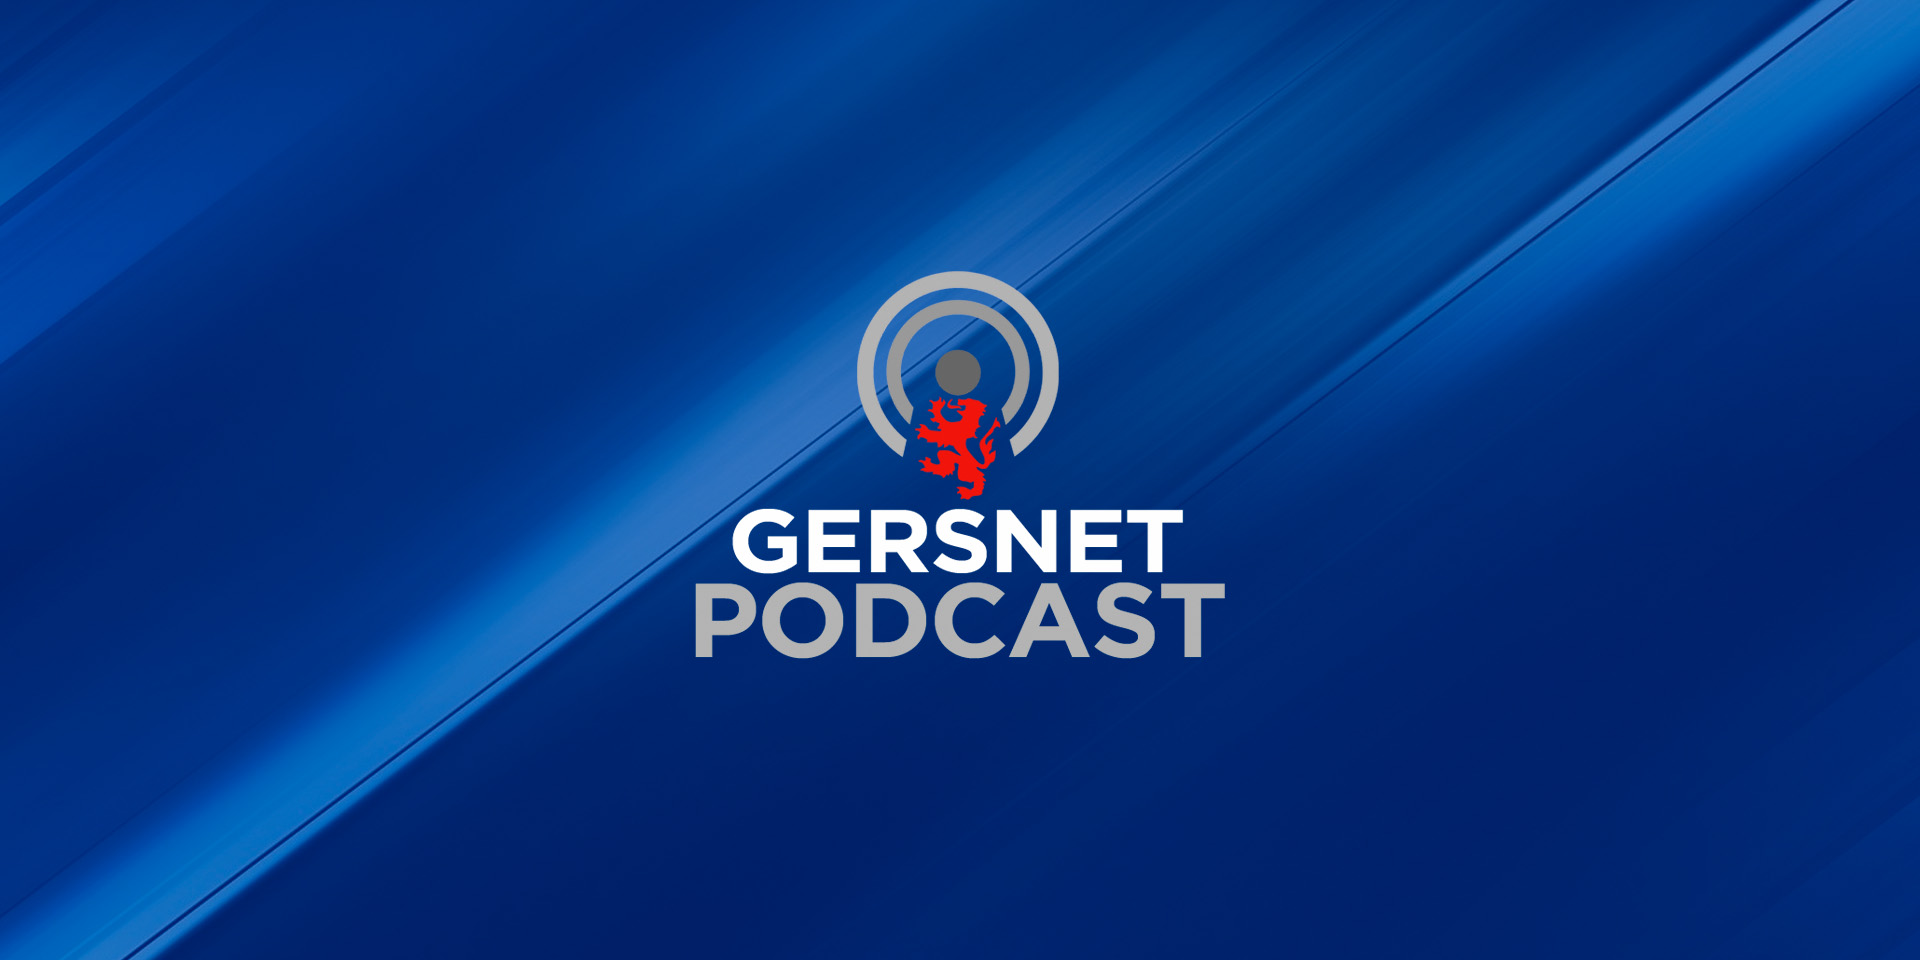 Gersnet Podcast 209 - Running out of excuses